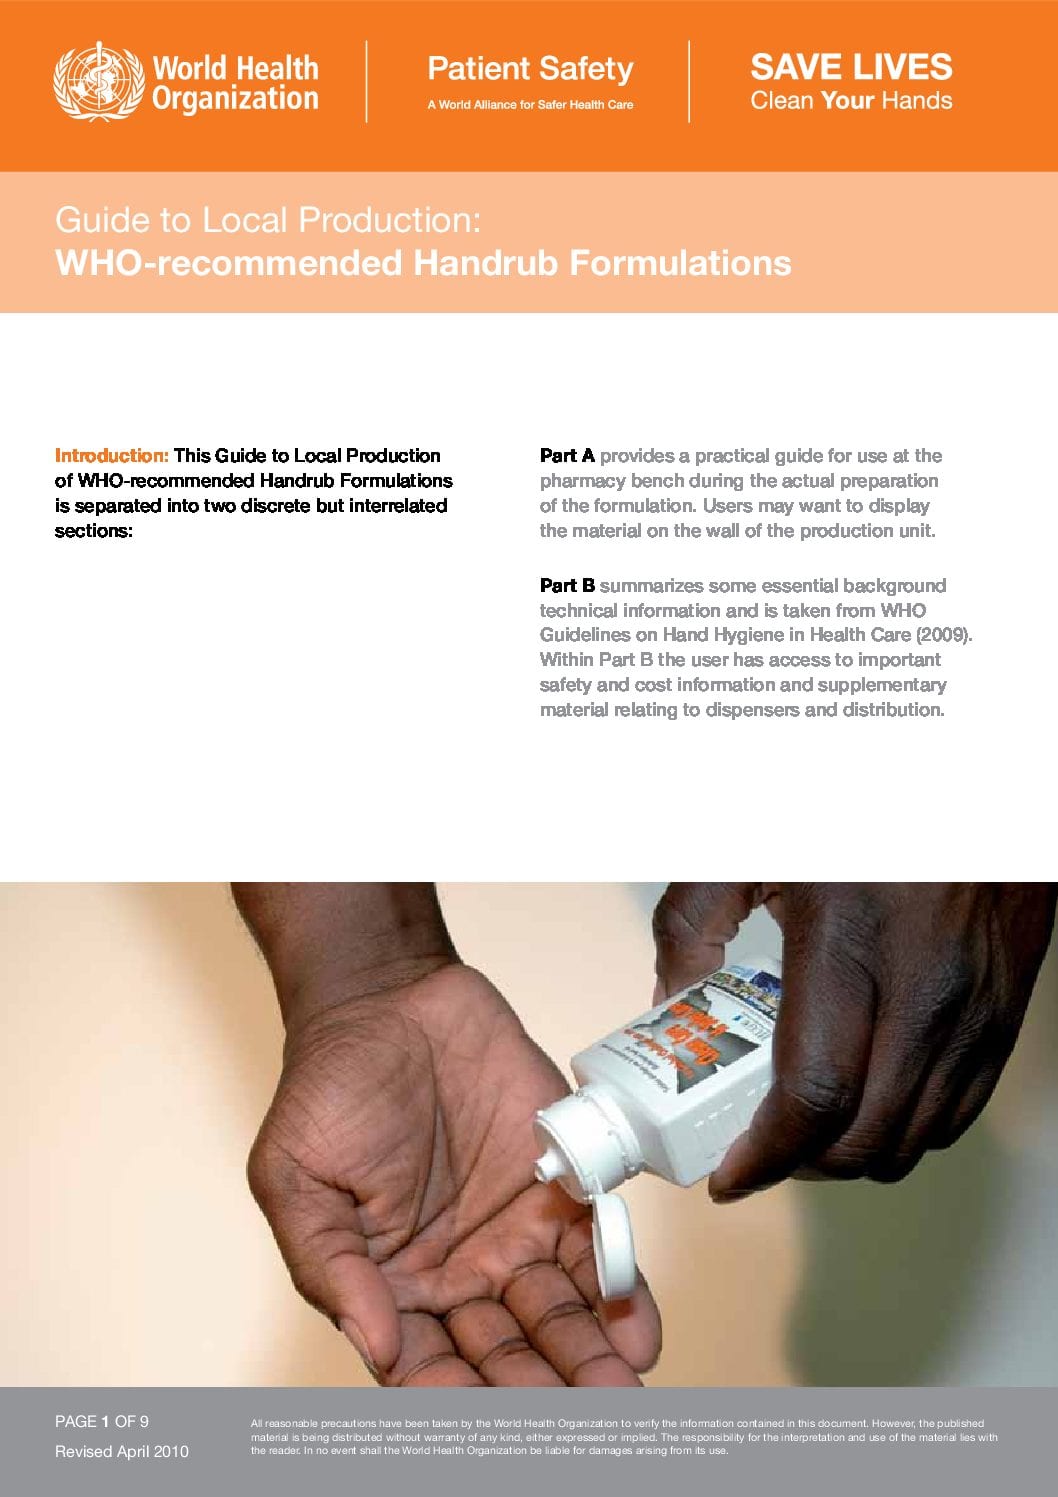 Guide to Local Production: WHO-recommended Handrub Formulations